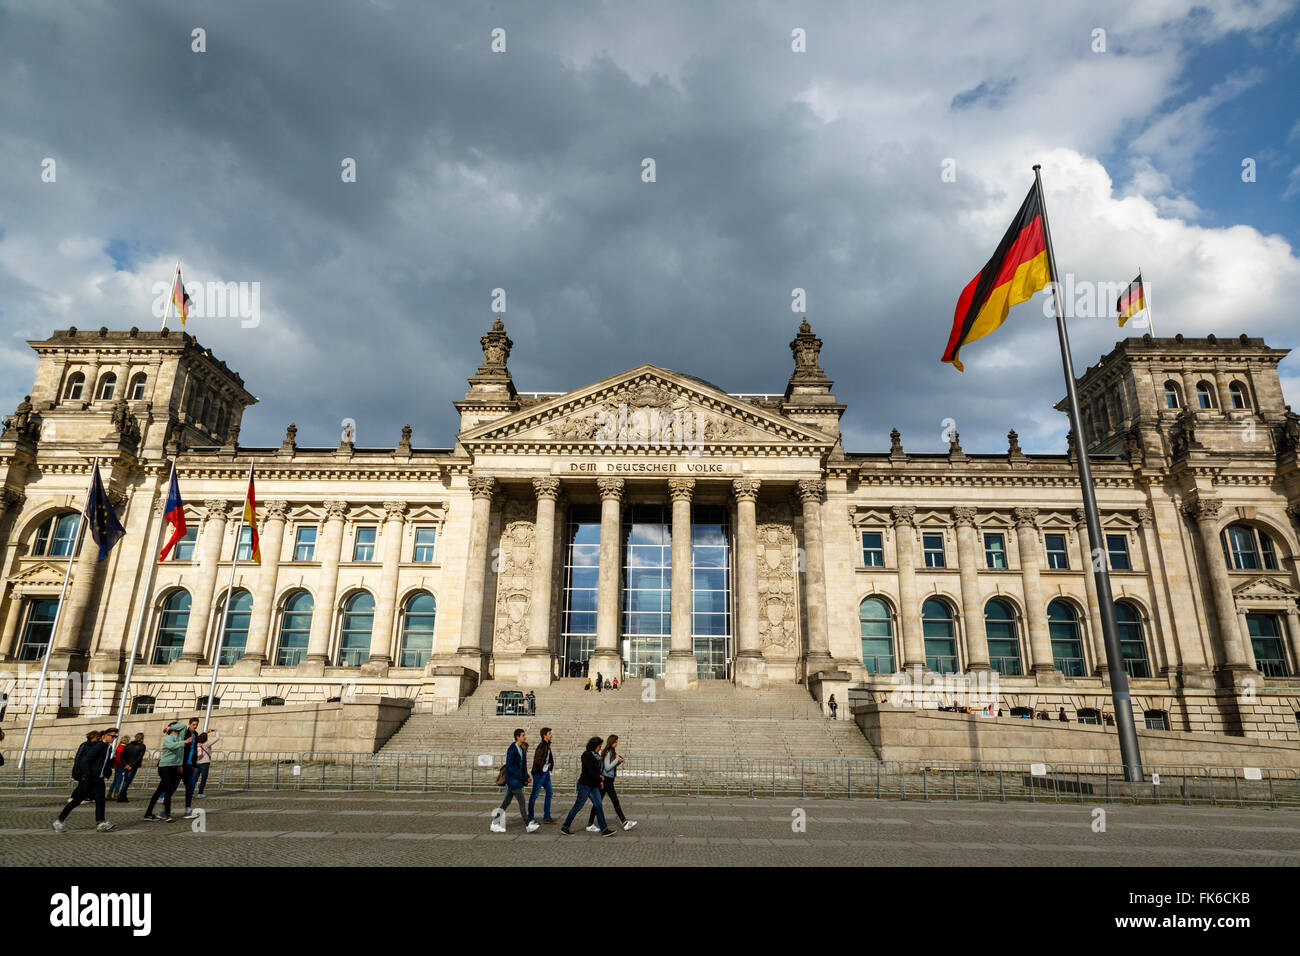 Le Reichstag (Parlement allemand), Mitte, Berlin, Germany, Europe Banque D'Images